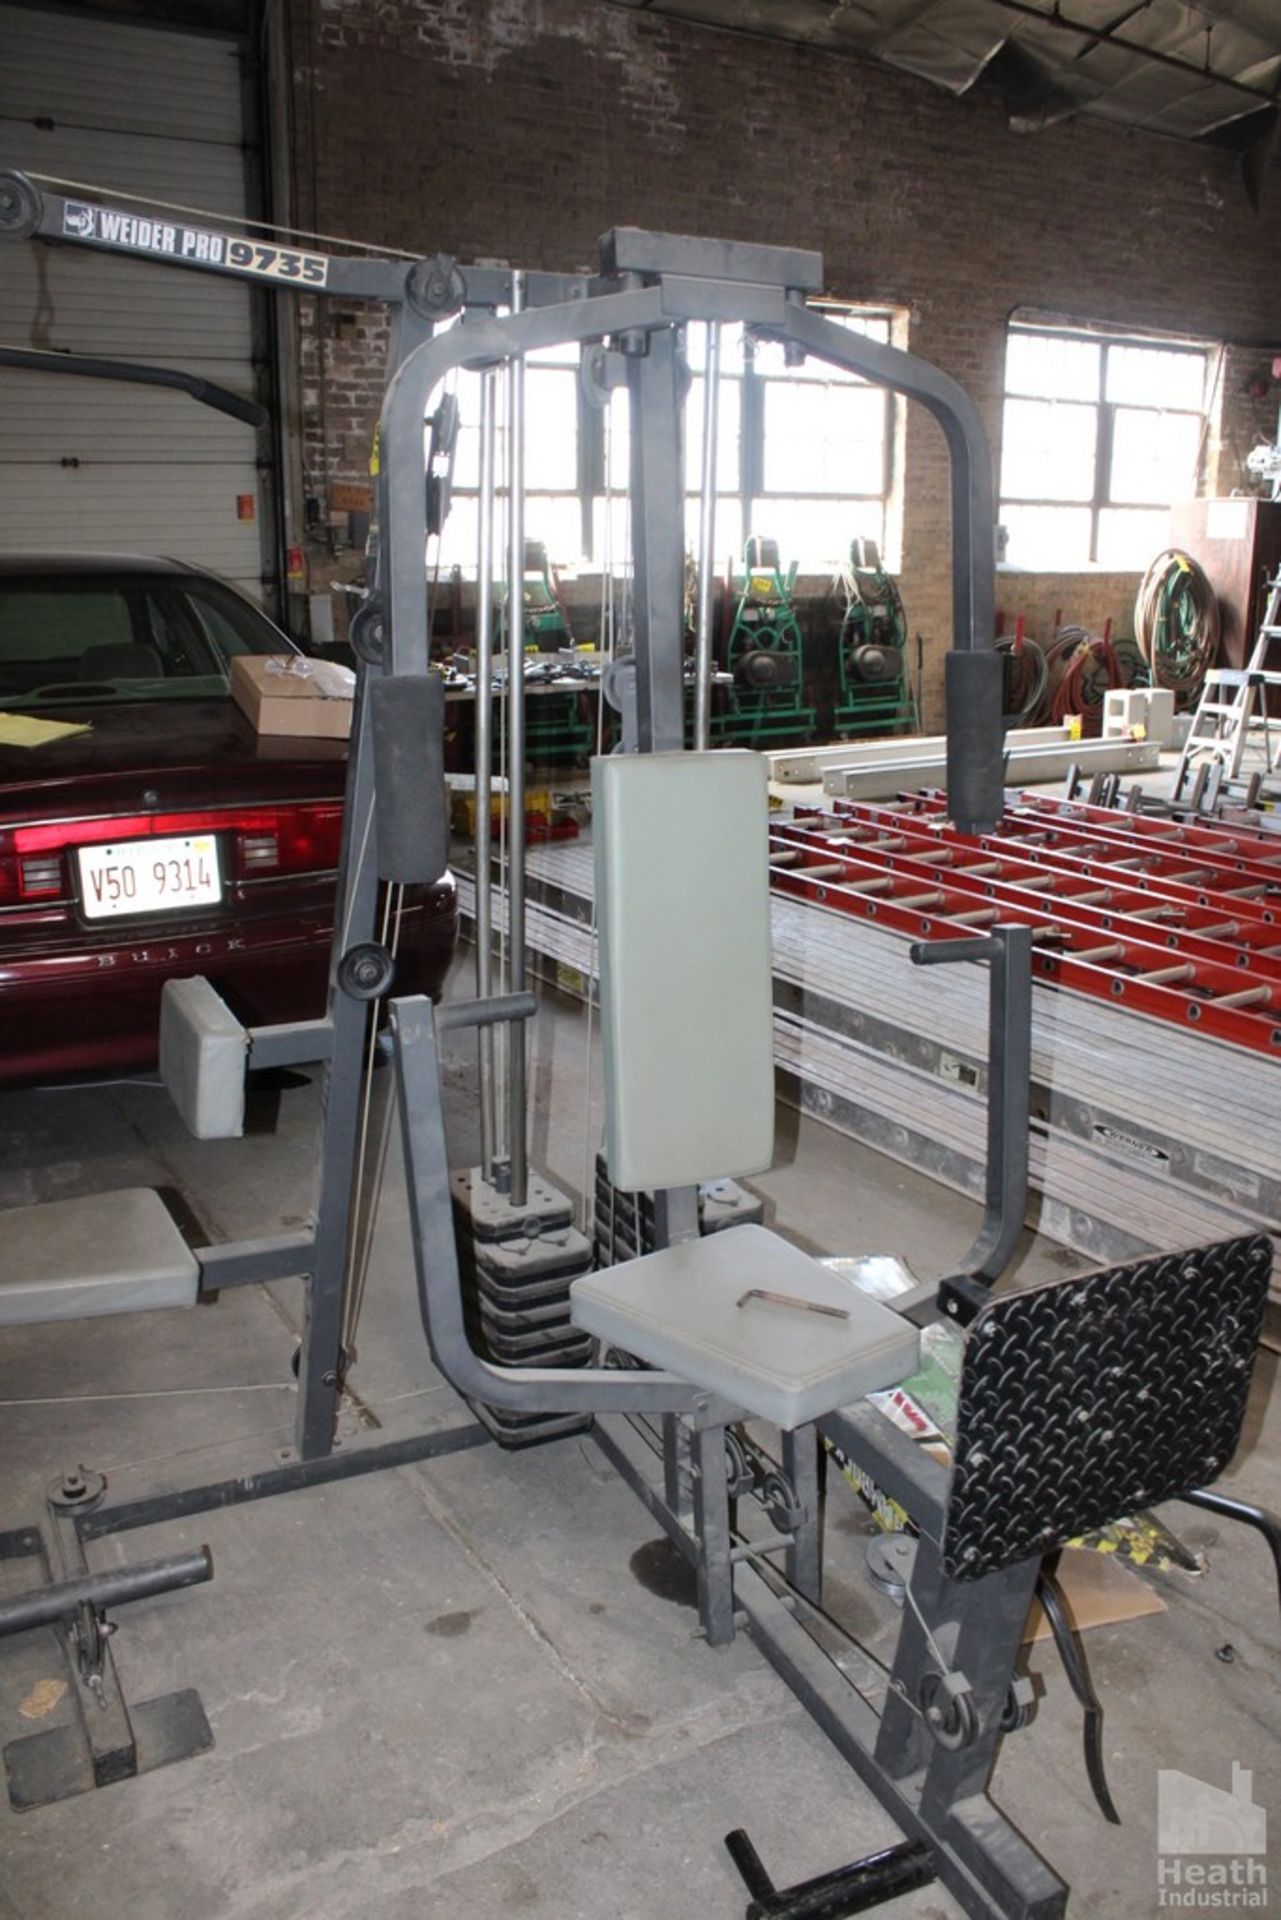 EXERCISE EQUIPMENT, WEIGHT STATION AND DOOR APPARATUS - Image 5 of 5